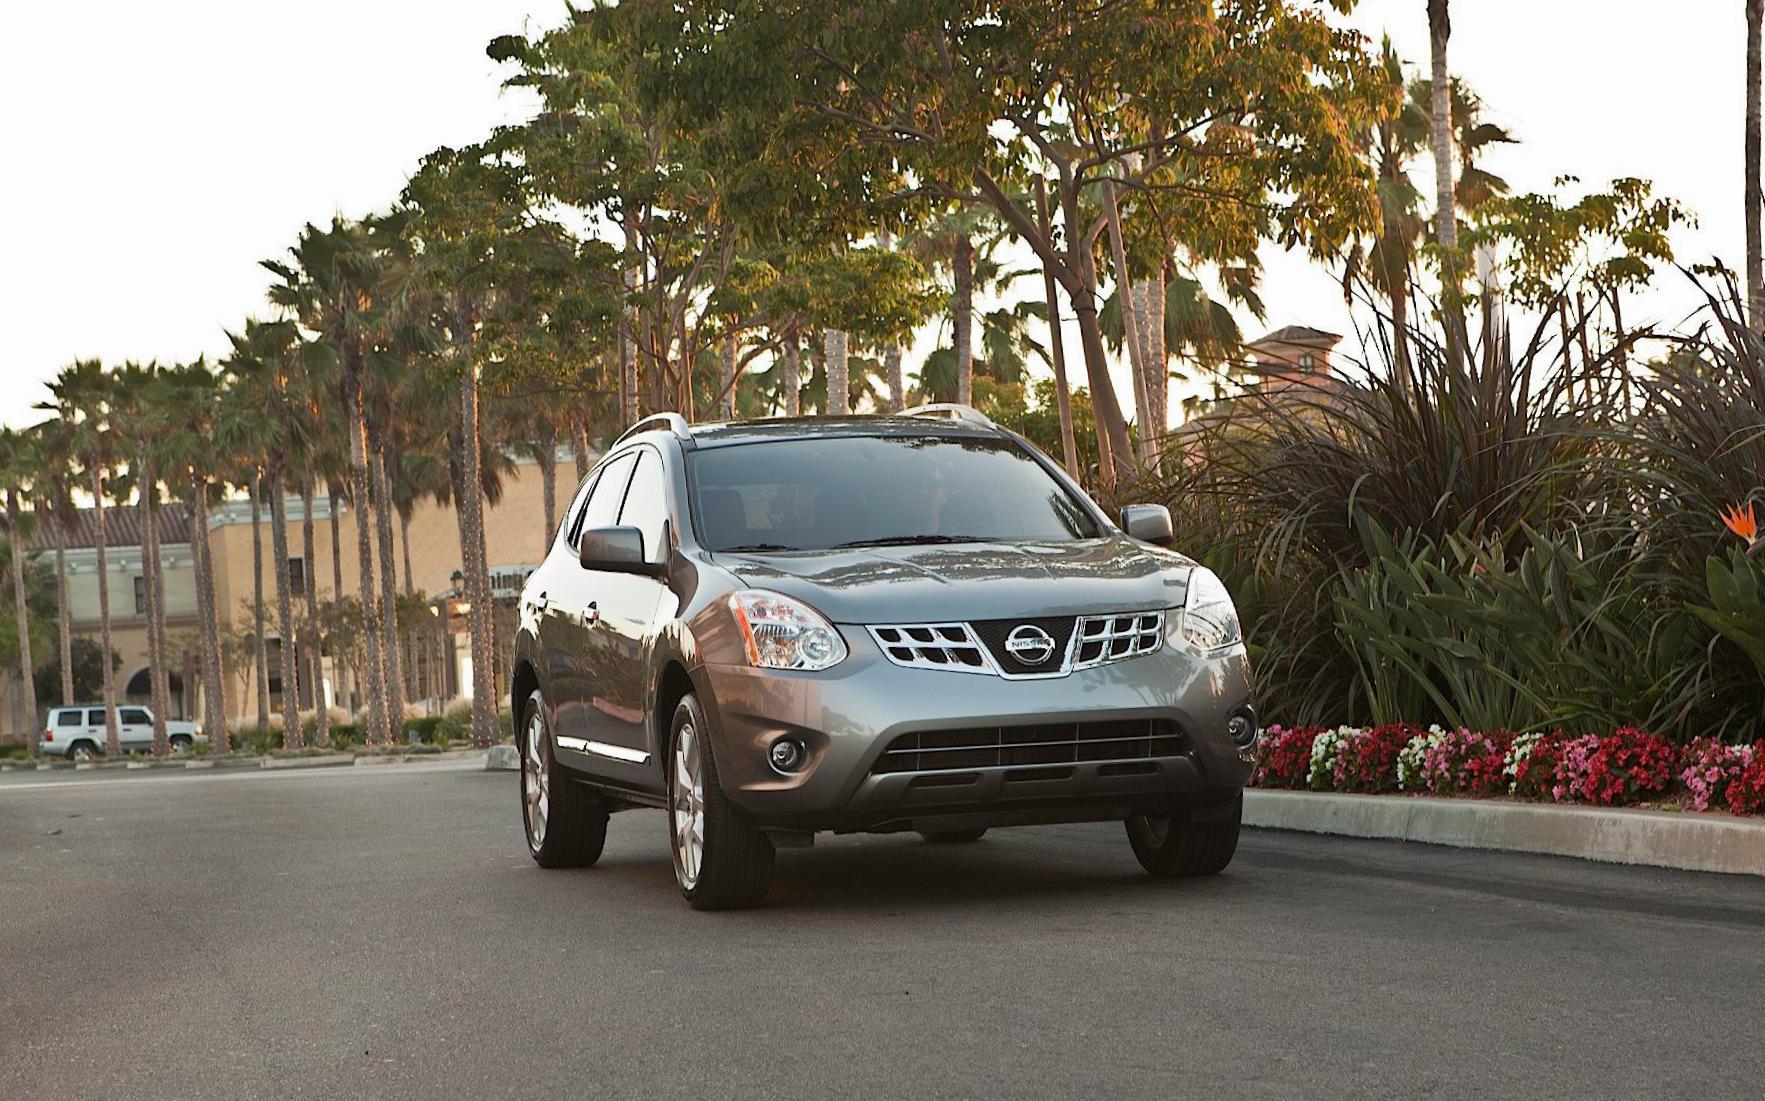 Nissan Rogue cost 2013